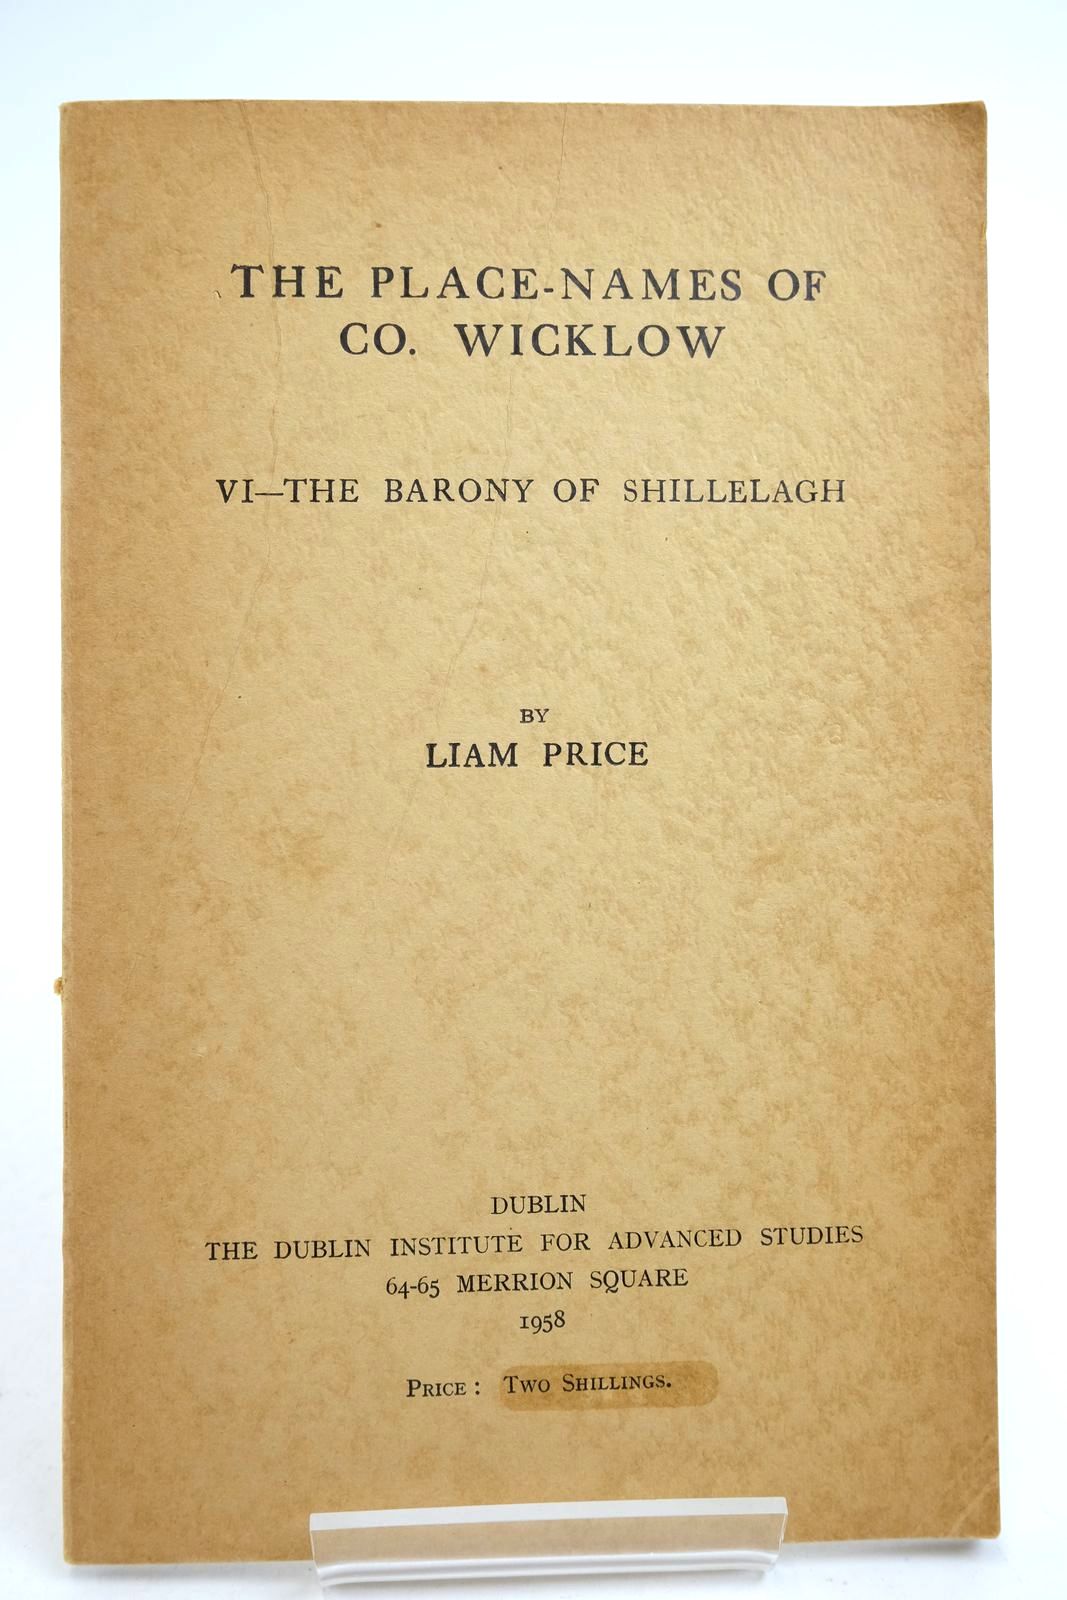 Photo of THE PLACE-NAMES OF CO. WICKLOW: VI - THE BARONY OF SHILLELAGH written by Price, Liam published by The Dublin Institute For Advanced Studies (STOCK CODE: 2140630)  for sale by Stella & Rose's Books